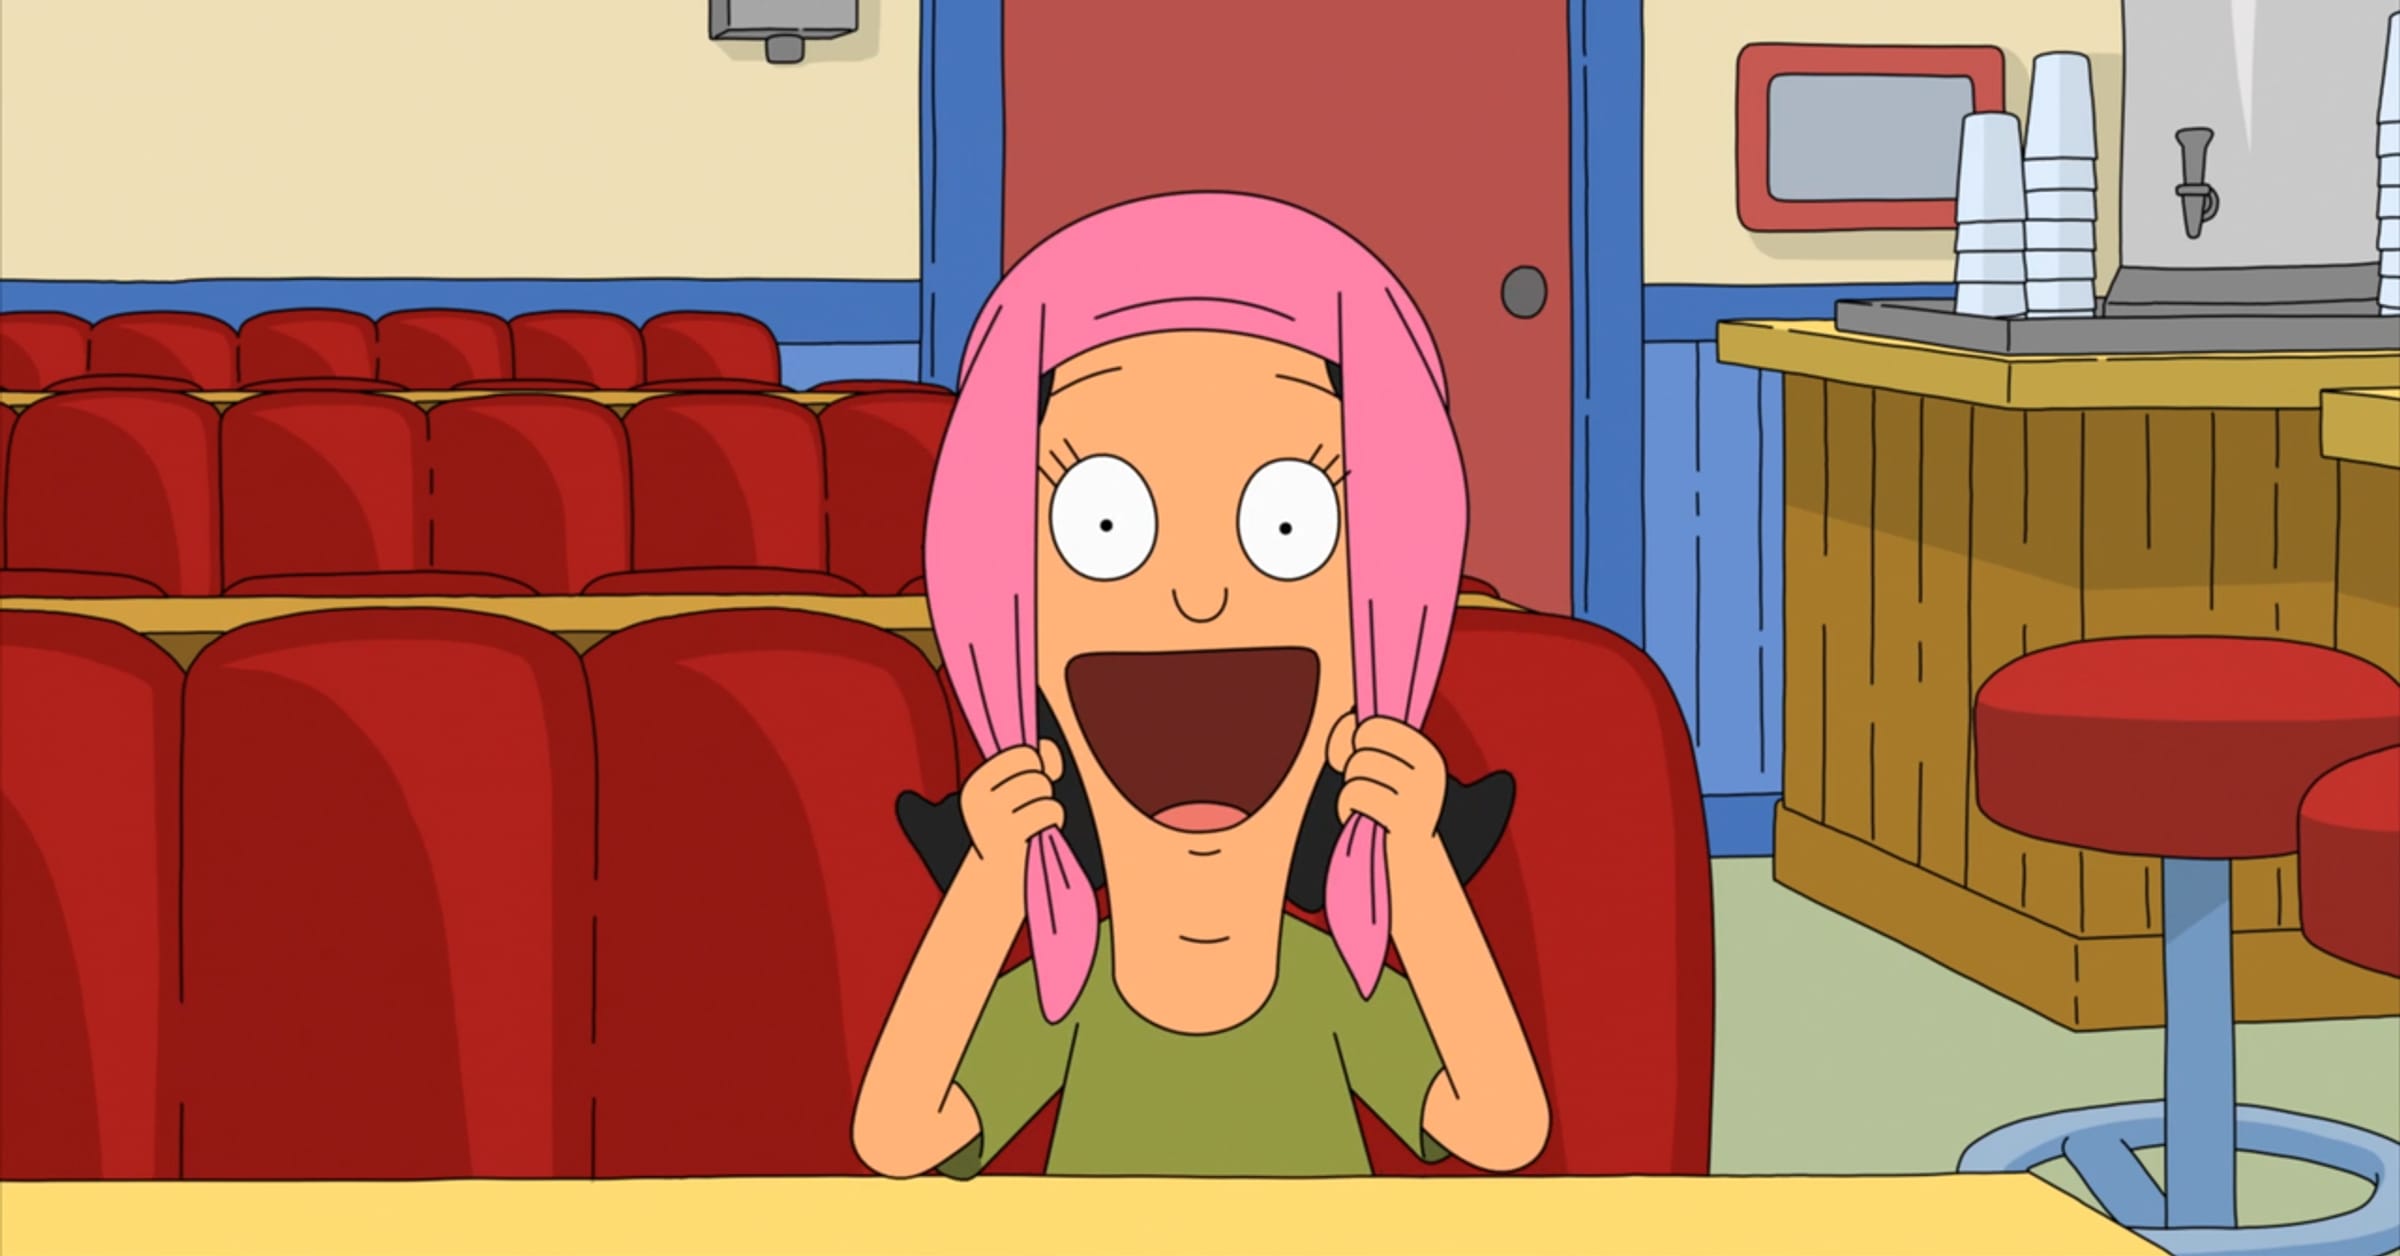 Louise without her hat : r/BobsBurgers